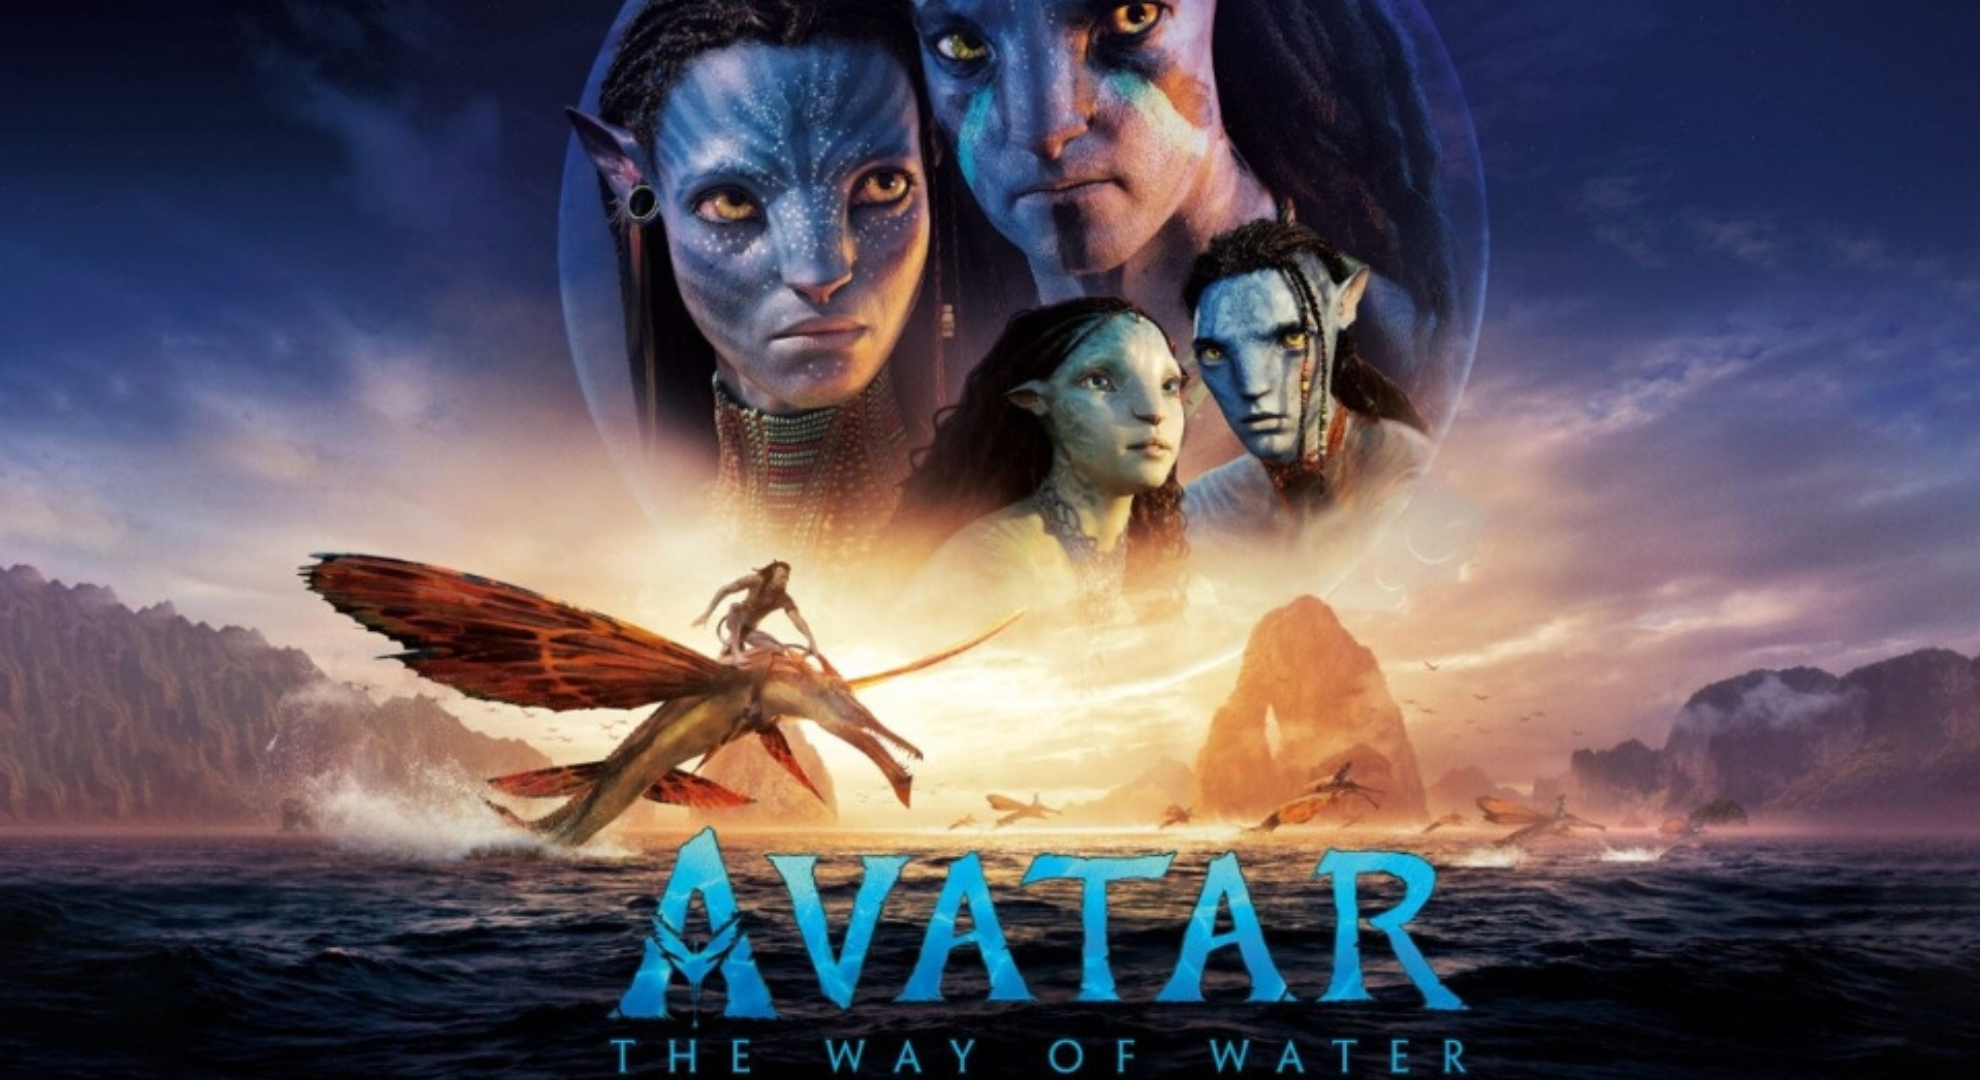 Avatar 2 Box Office Is Now The 10th Highest Grossing Film In North  America Surpasses The Avengers 62335 Million